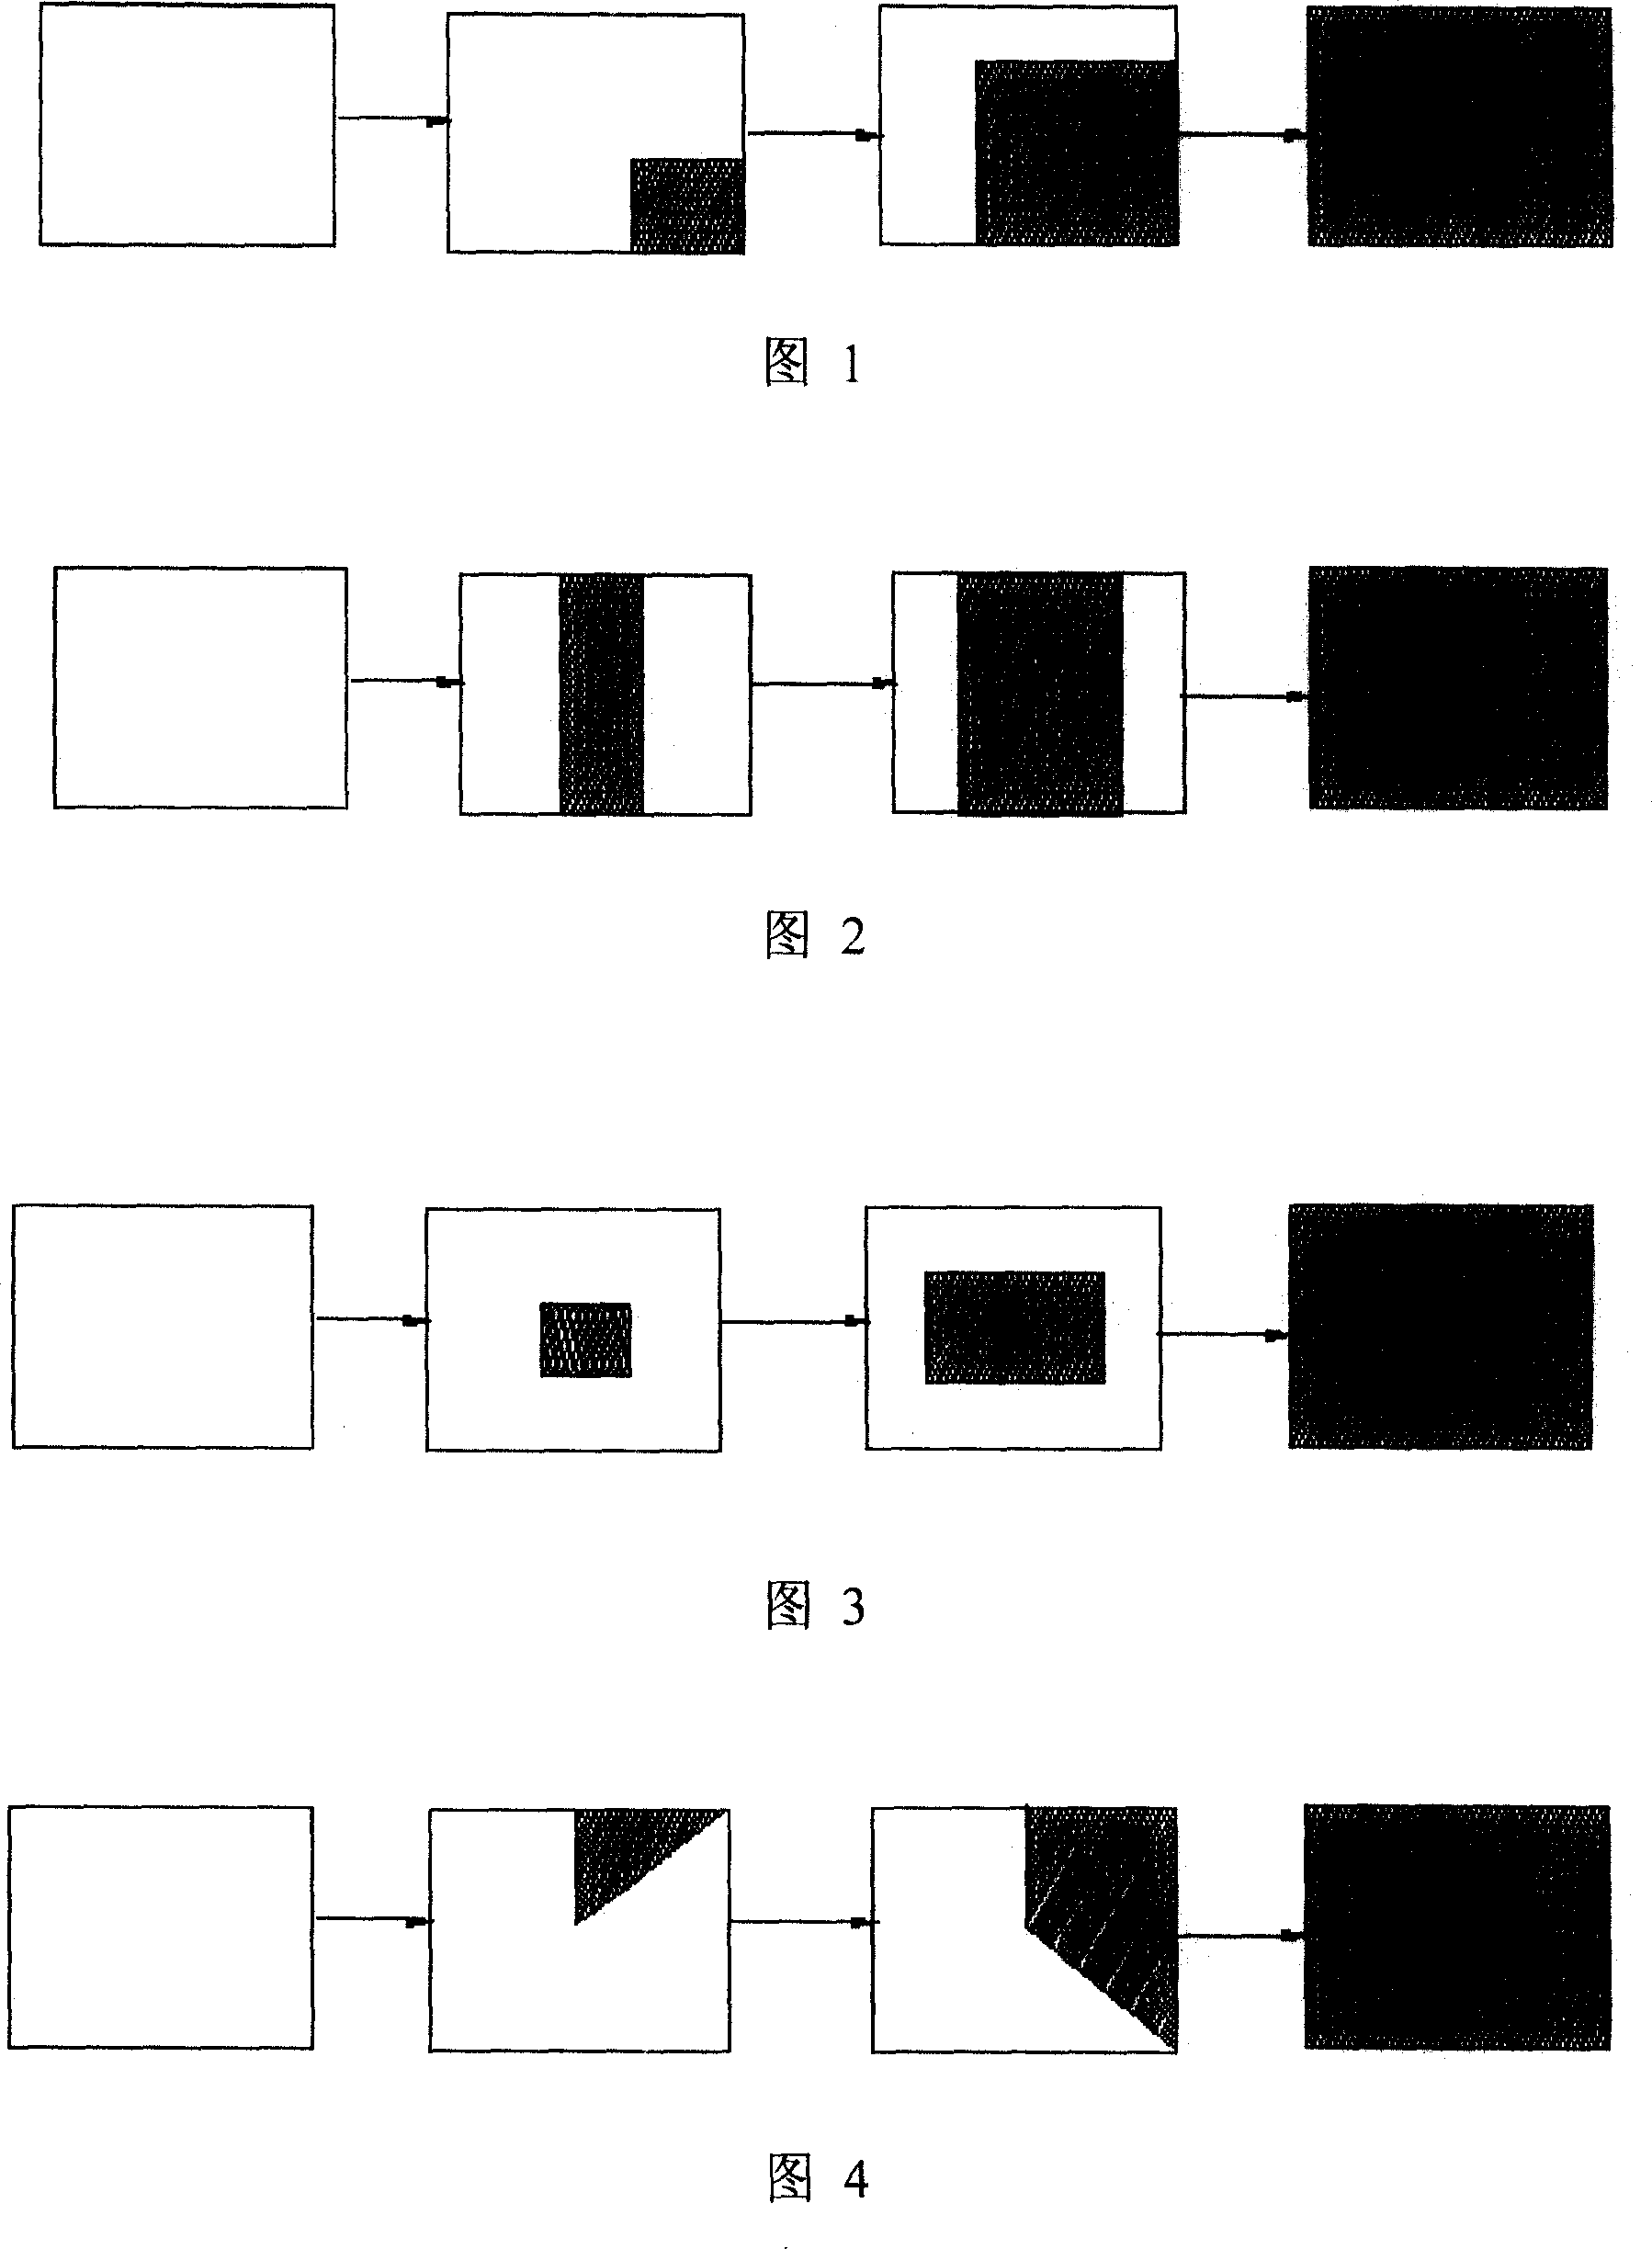 Television set on-off screen display process